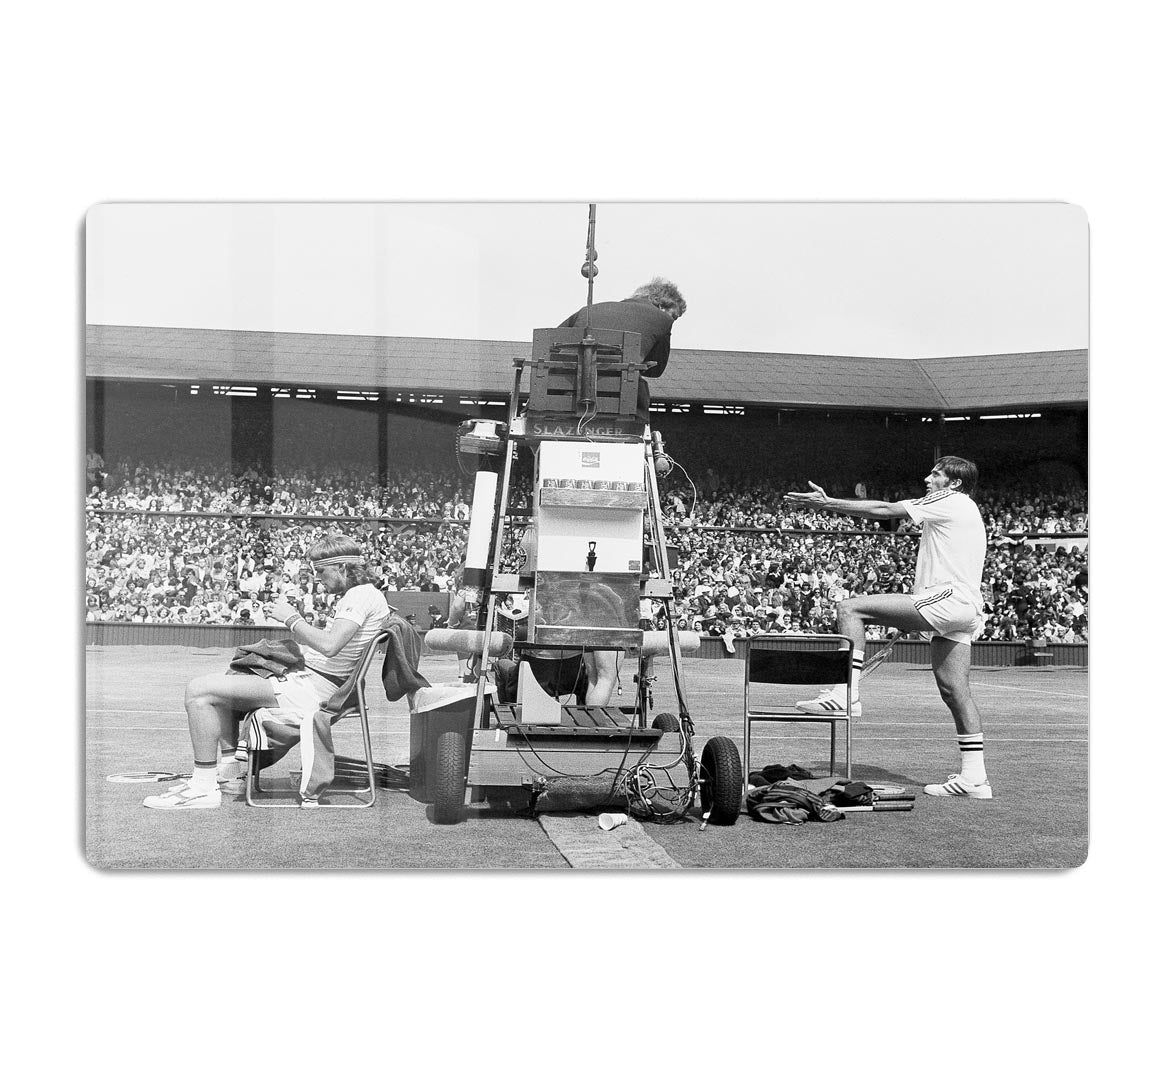 Ilie Nastase argues with the umpire HD Metal Print